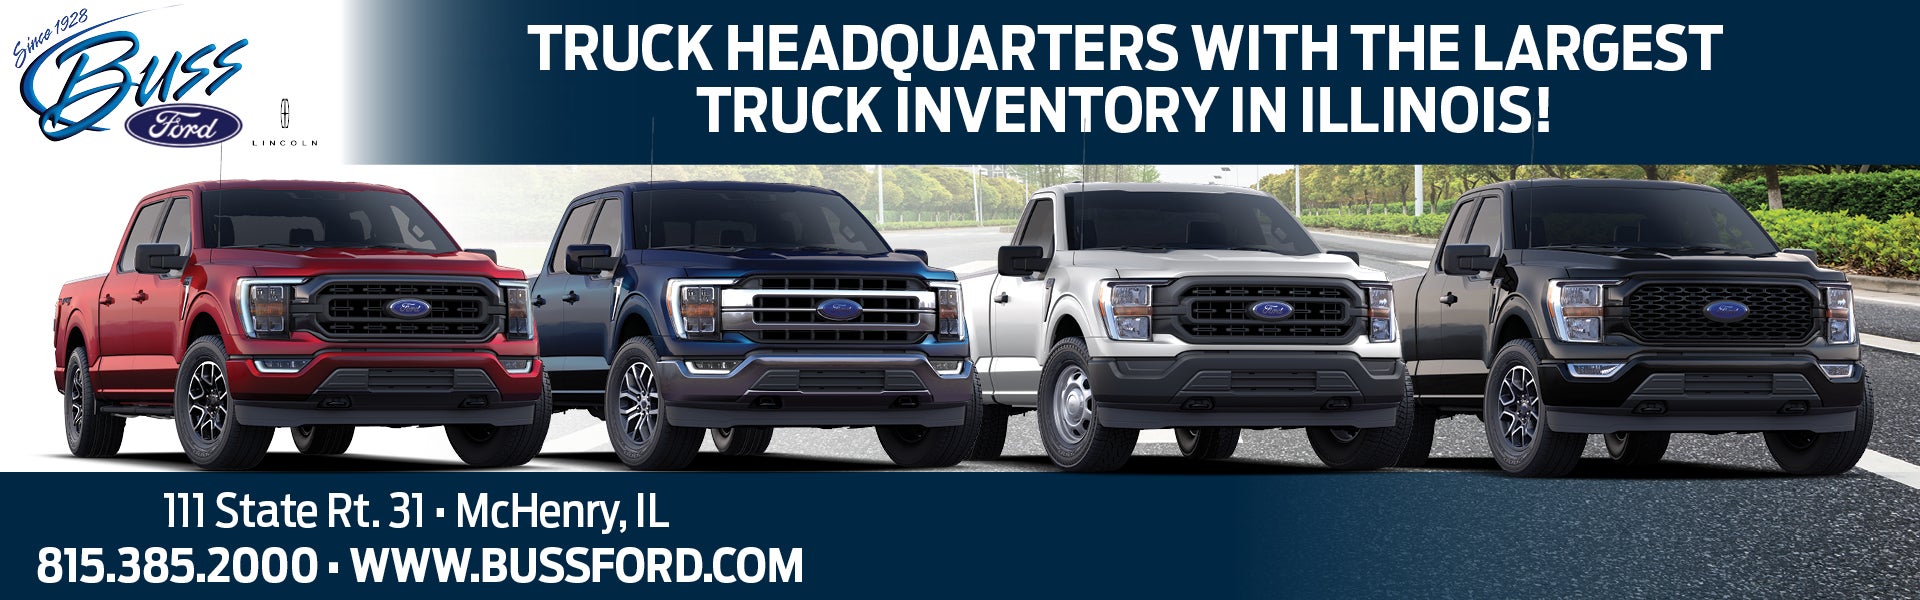 Largest Truck Inventory in Illinois